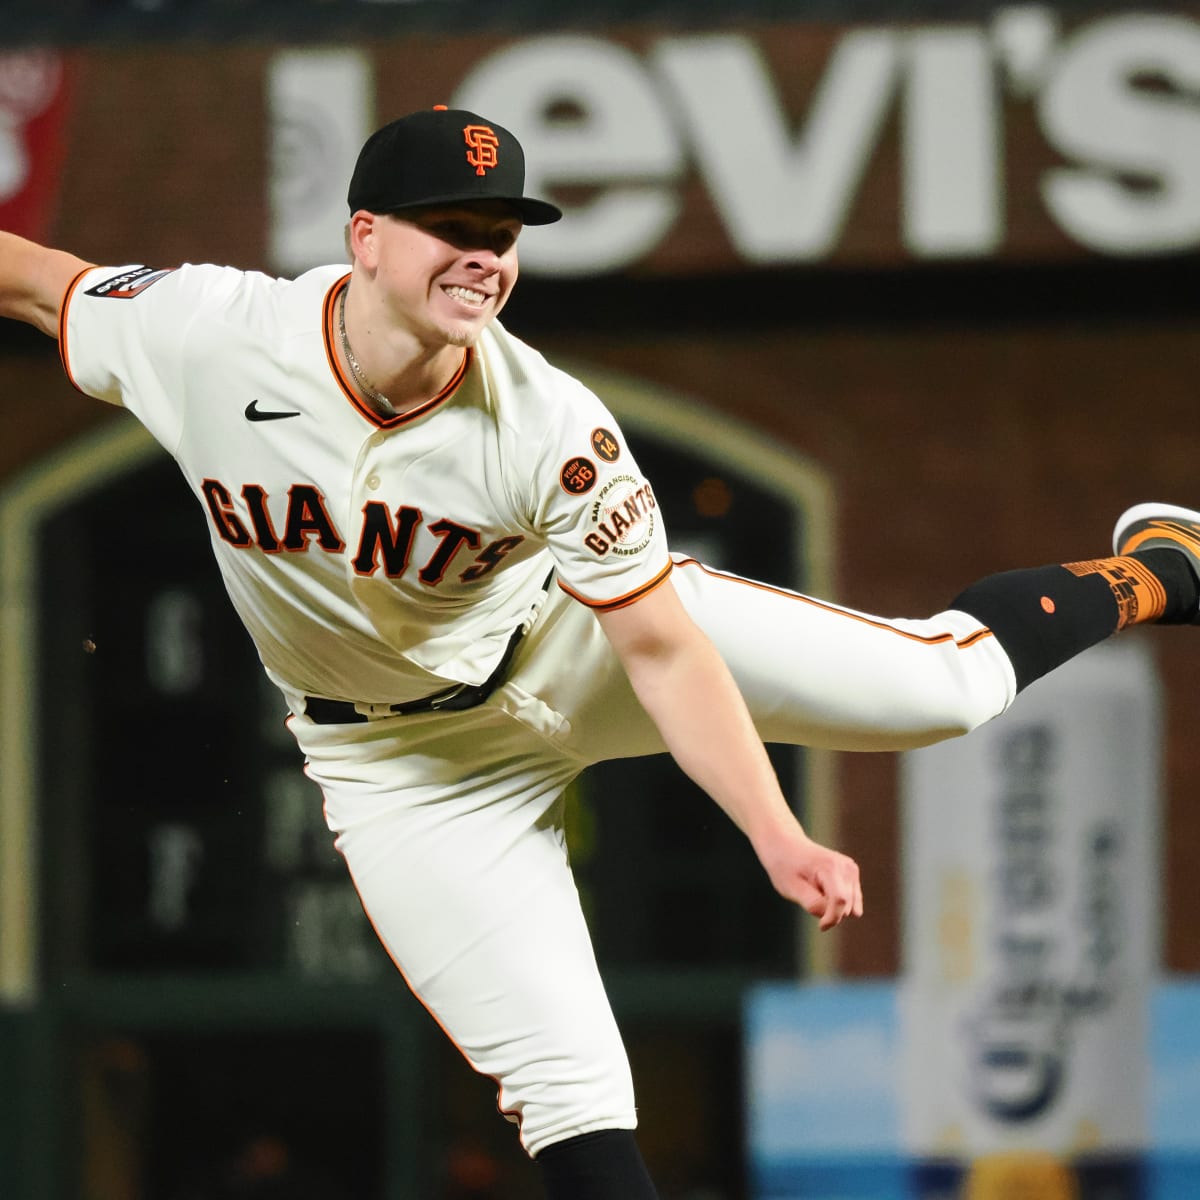 Giants' Logan Webb commits to pitch for Team USA in WBC